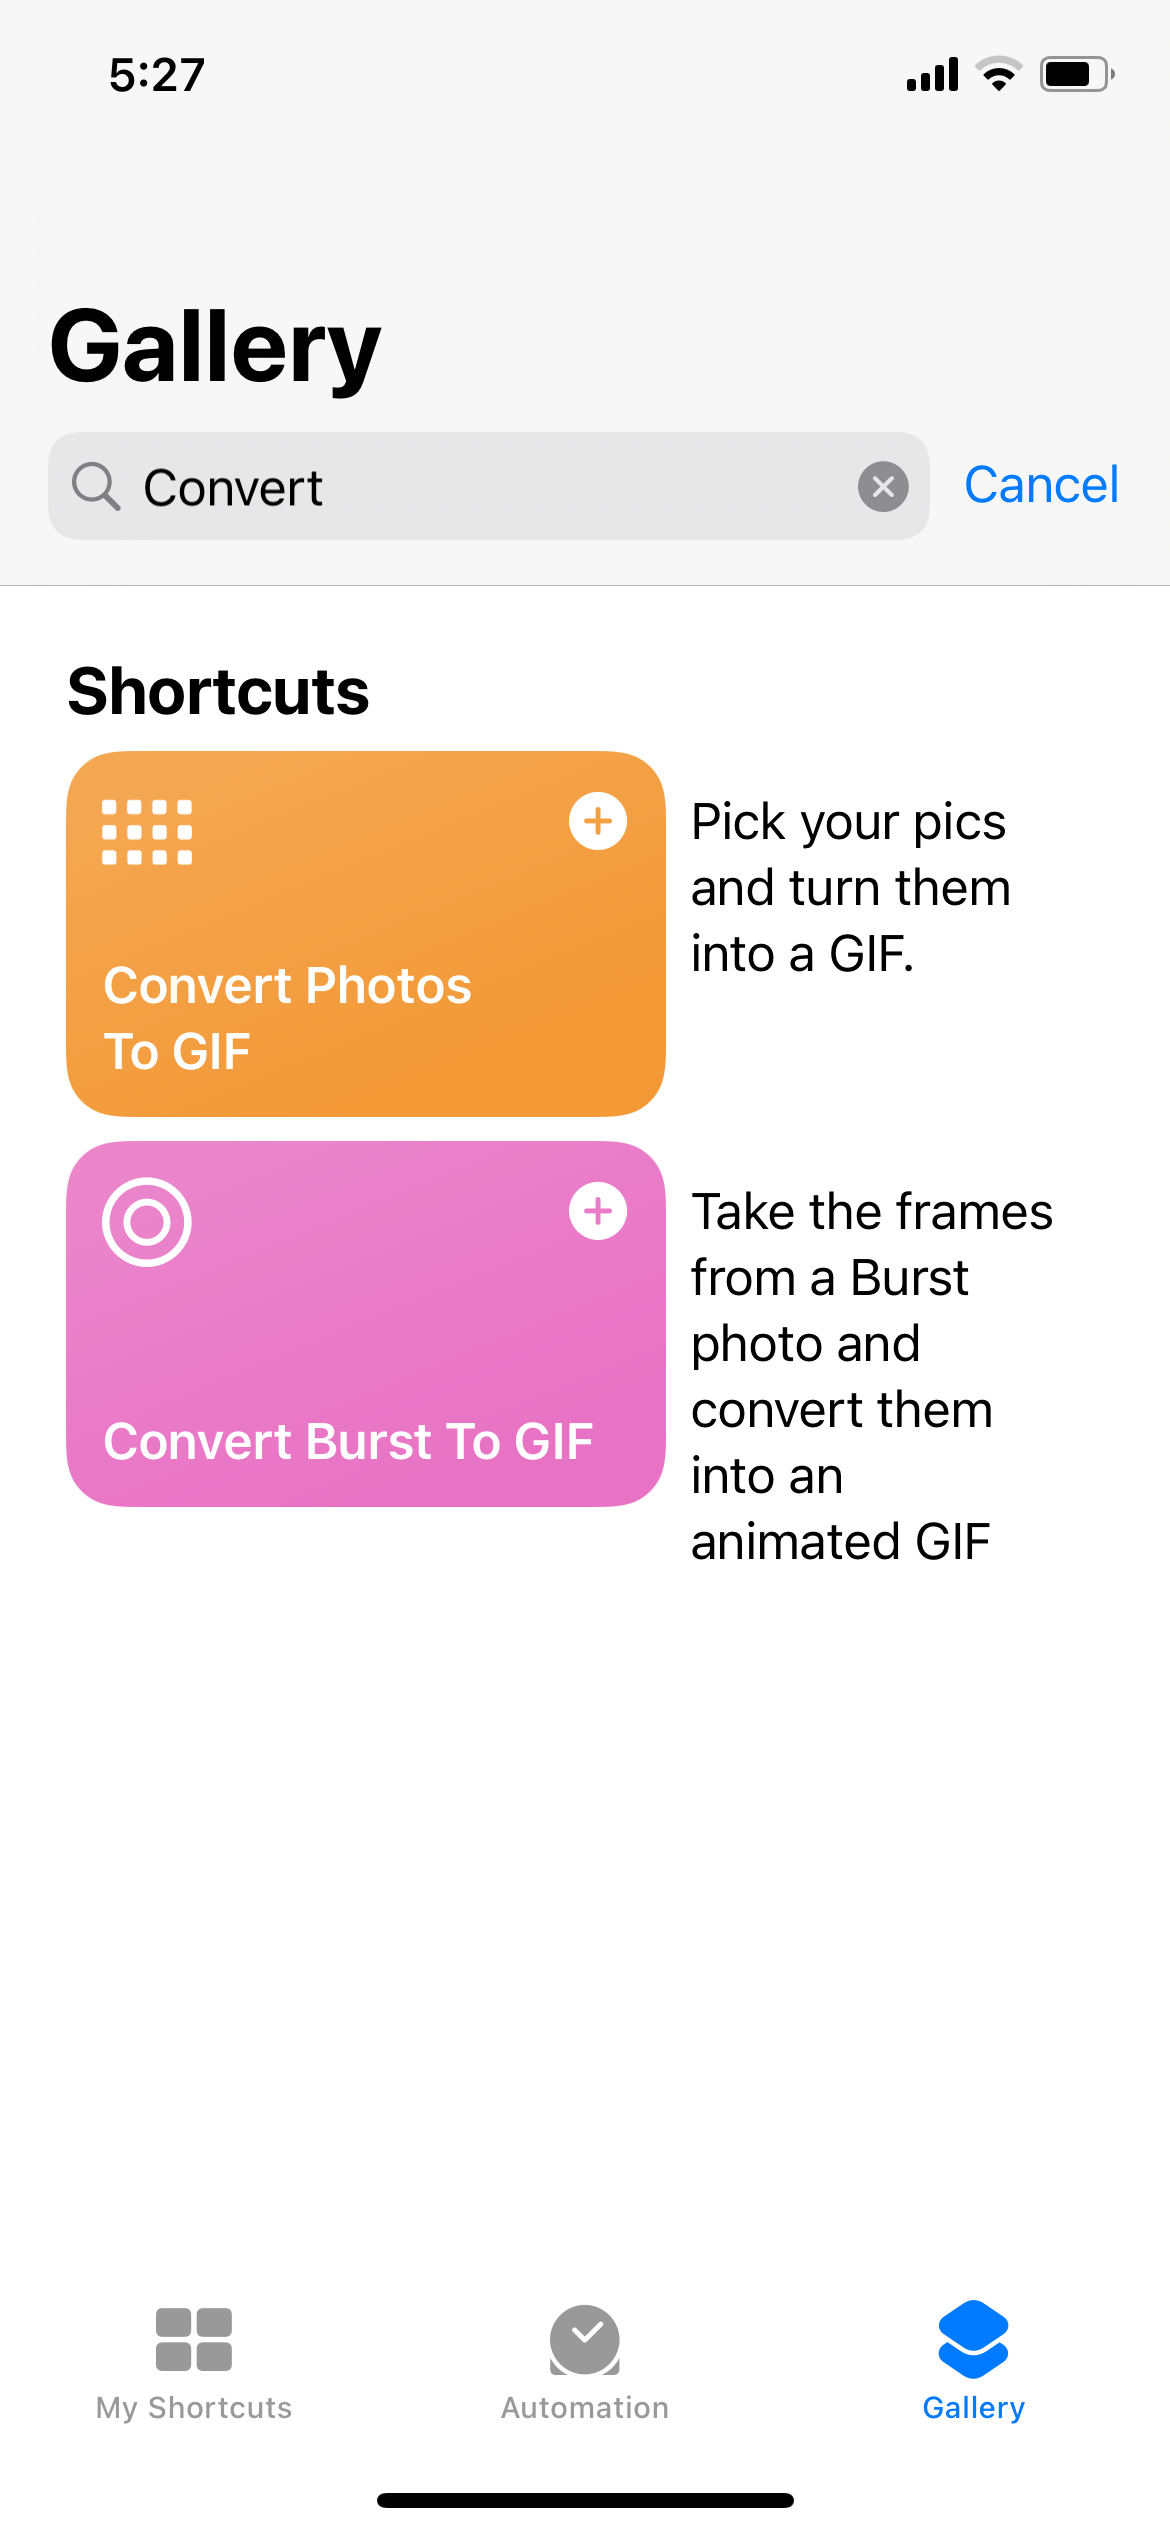 Convert Photos to GIF in Gallery